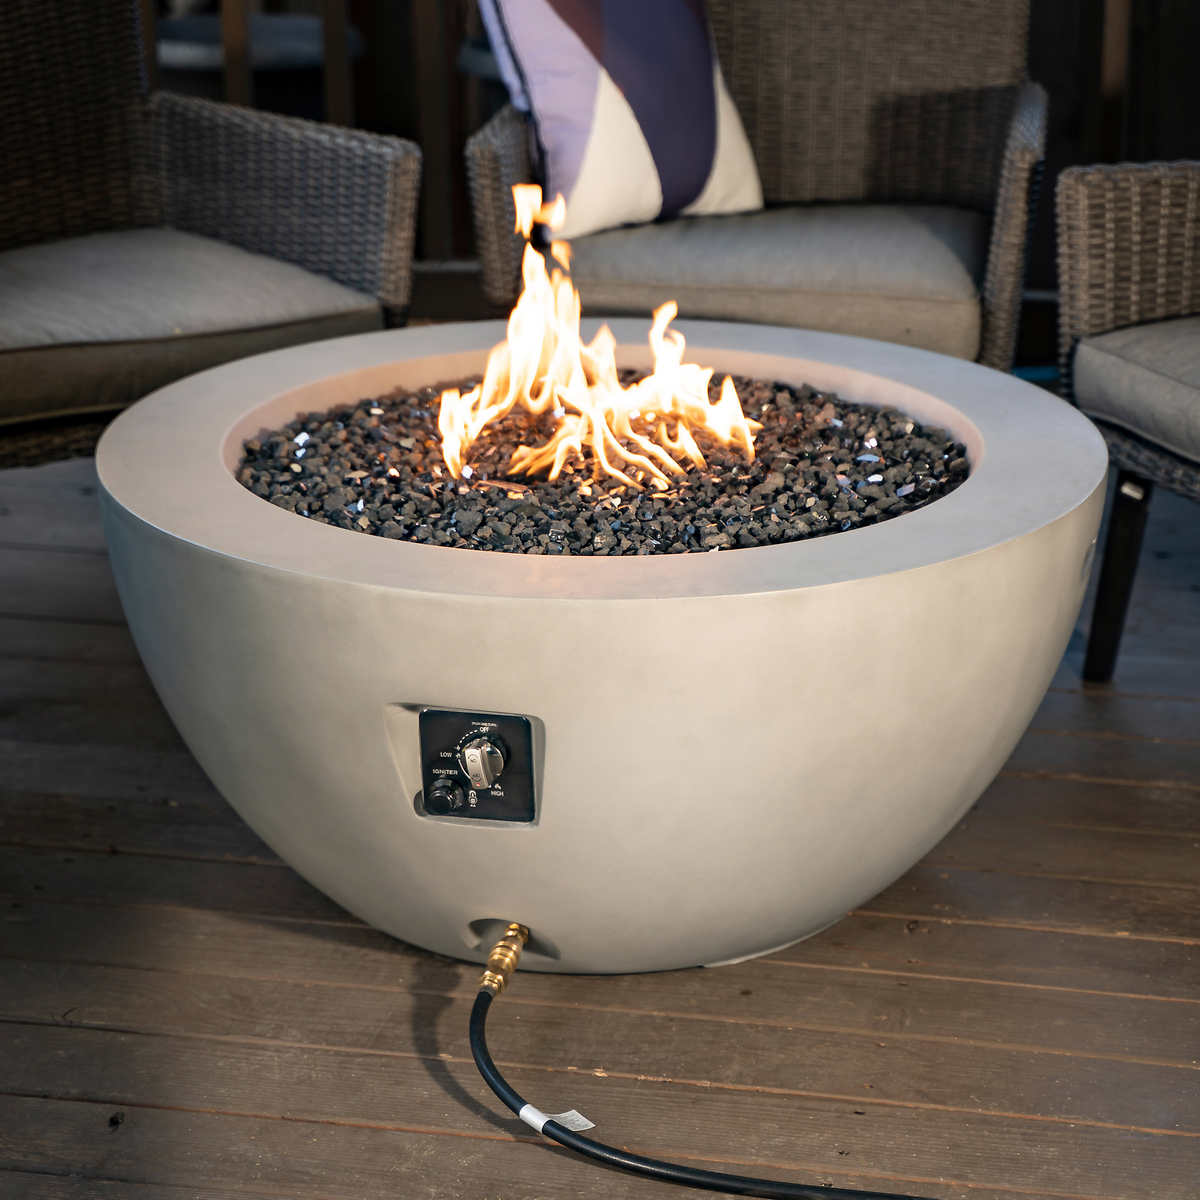 Faux Concrete Gas Fire Pit Costco, Can You Use Any Glass In A Fire Pit